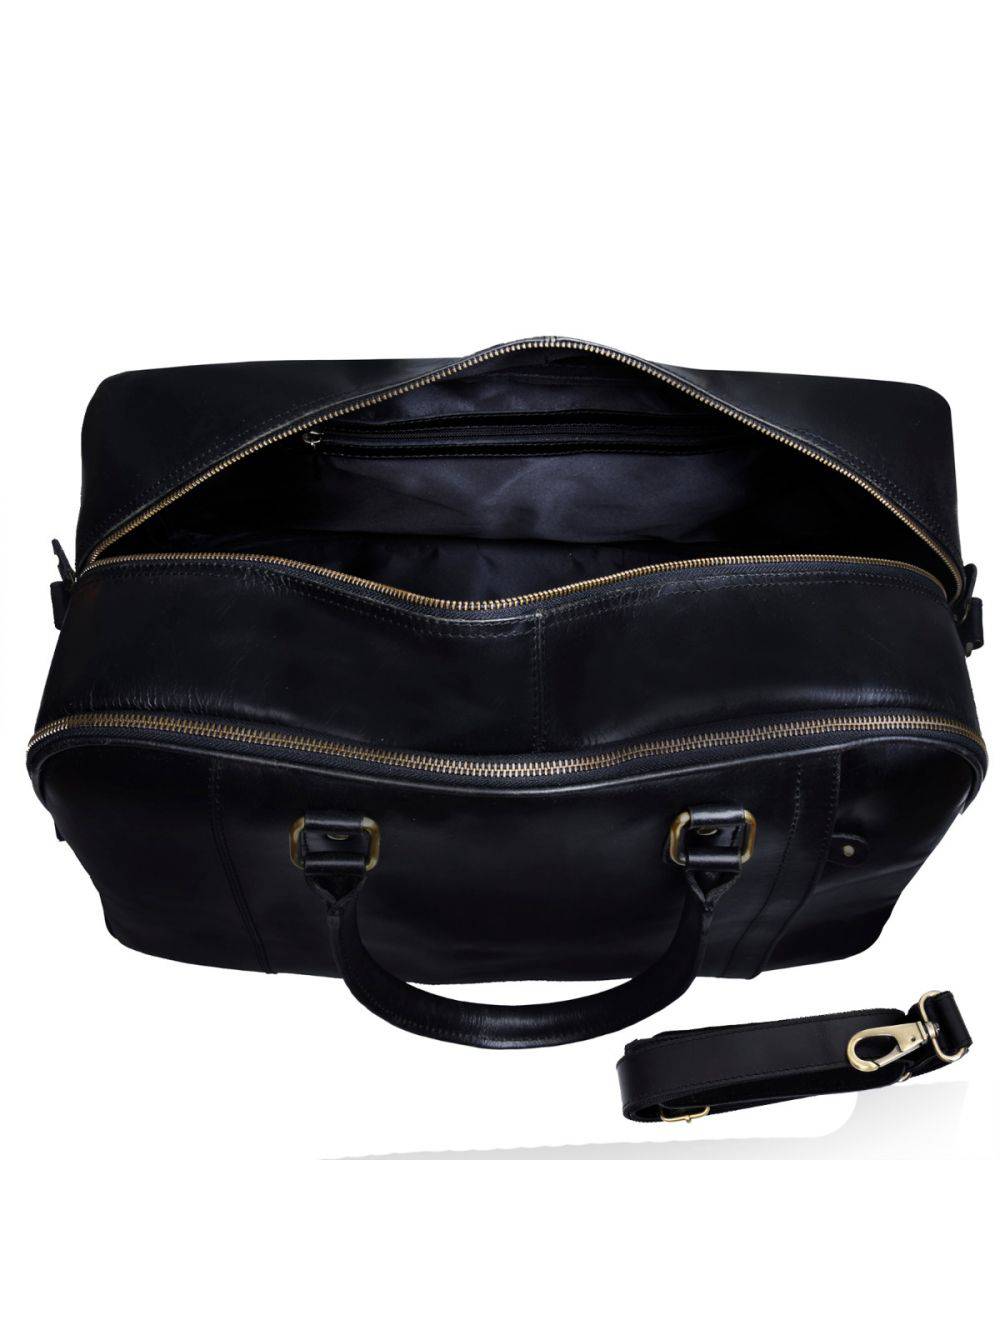 Black Leather Travel Carry On Duffle Bag Luggage for sale - Woodcock and Cavendish